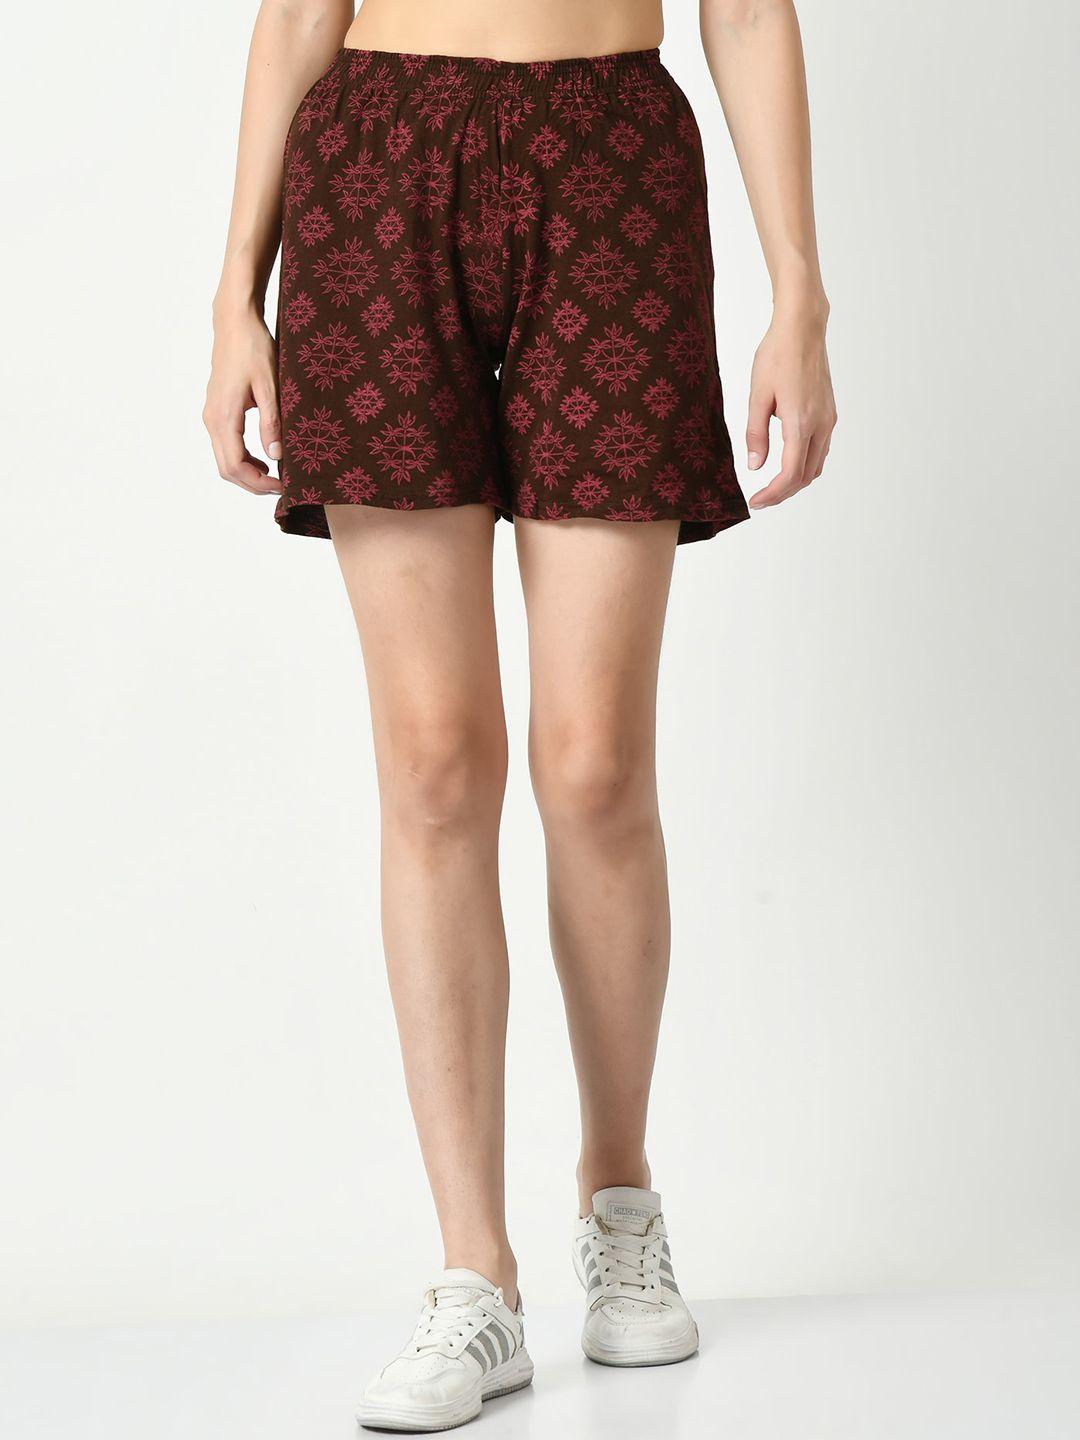 baesd-women-floral-printed-high-rise-pure-cotton-shorts